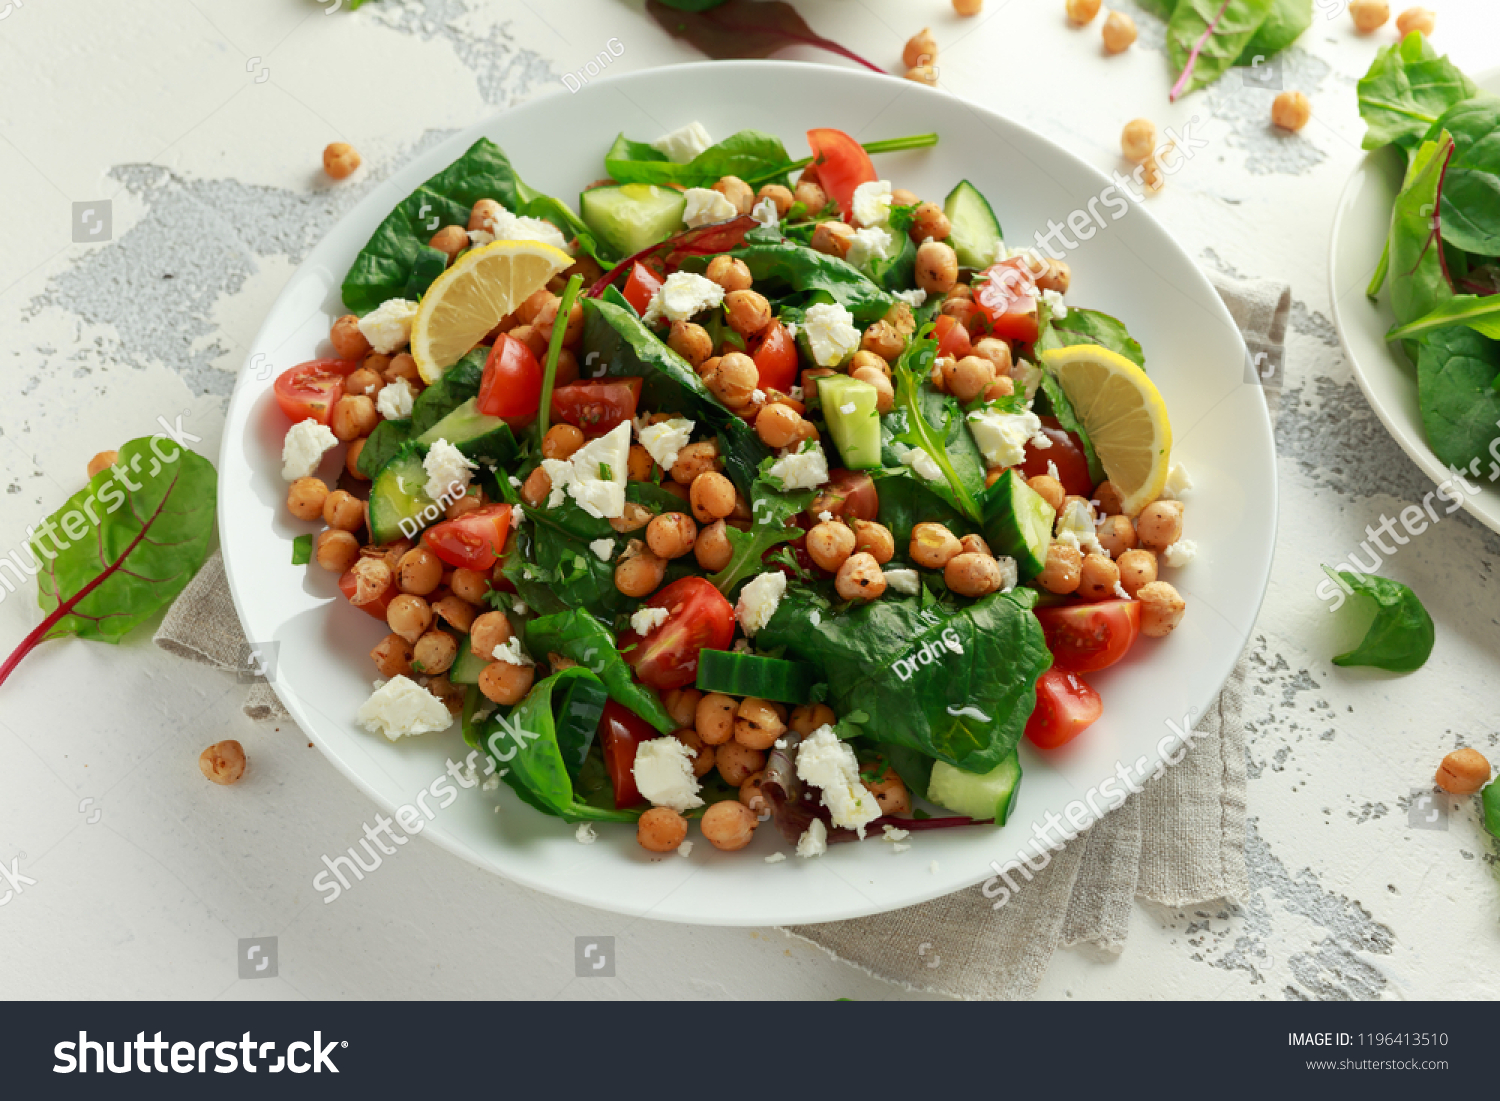 Chickpeas Salad with cucumber, tomatoes, feta cheese and green mix in a white plate. healthy food. #1196413510